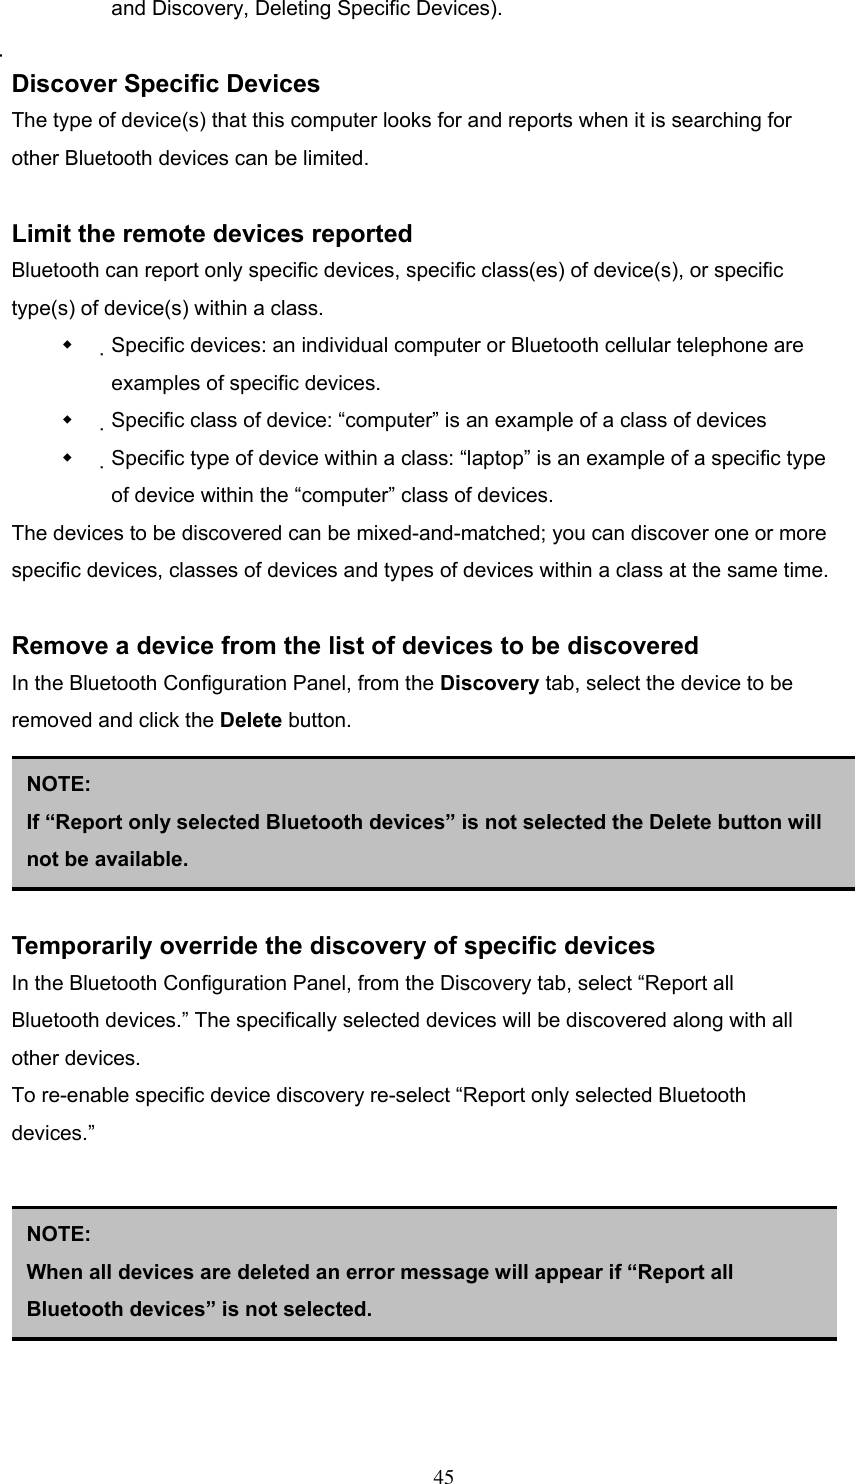 and Discovery, Deleting Specific Devices).  Discover Specific Devices The type of device(s) that this computer looks for and reports when it is searching for other Bluetooth devices can be limited.  Limit the remote devices reported Bluetooth can report only specific devices, specific class(es) of device(s), or specific type(s) of device(s) within a class.   Specific devices: an individual computer or Bluetooth cellular telephone are examples of specific devices.   Specific class of device: “computer” is an example of a class of devices   Specific type of device within a class: “laptop” is an example of a specific type of device within the “computer” class of devices. The devices to be discovered can be mixed-and-matched; you can discover one or more specific devices, classes of devices and types of devices within a class at the same time.  Remove a device from the list of devices to be discovered In the Bluetooth Configuration Panel, from the Discovery tab, select the device to be removed and click the Delete button.      NOTE: If “Report only selected Bluetooth devices” is not selected the Delete button will not be available. Temporarily override the discovery of specific devices In the Bluetooth Configuration Panel, from the Discovery tab, select “Report all Bluetooth devices.” The specifically selected devices will be discovered along with all other devices. To re-enable specific device discovery re-select “Report only selected Bluetooth devices.”       NOTE:  When all devices are deleted an error message will appear if “Report all Bluetooth devices” is not selected.   45 